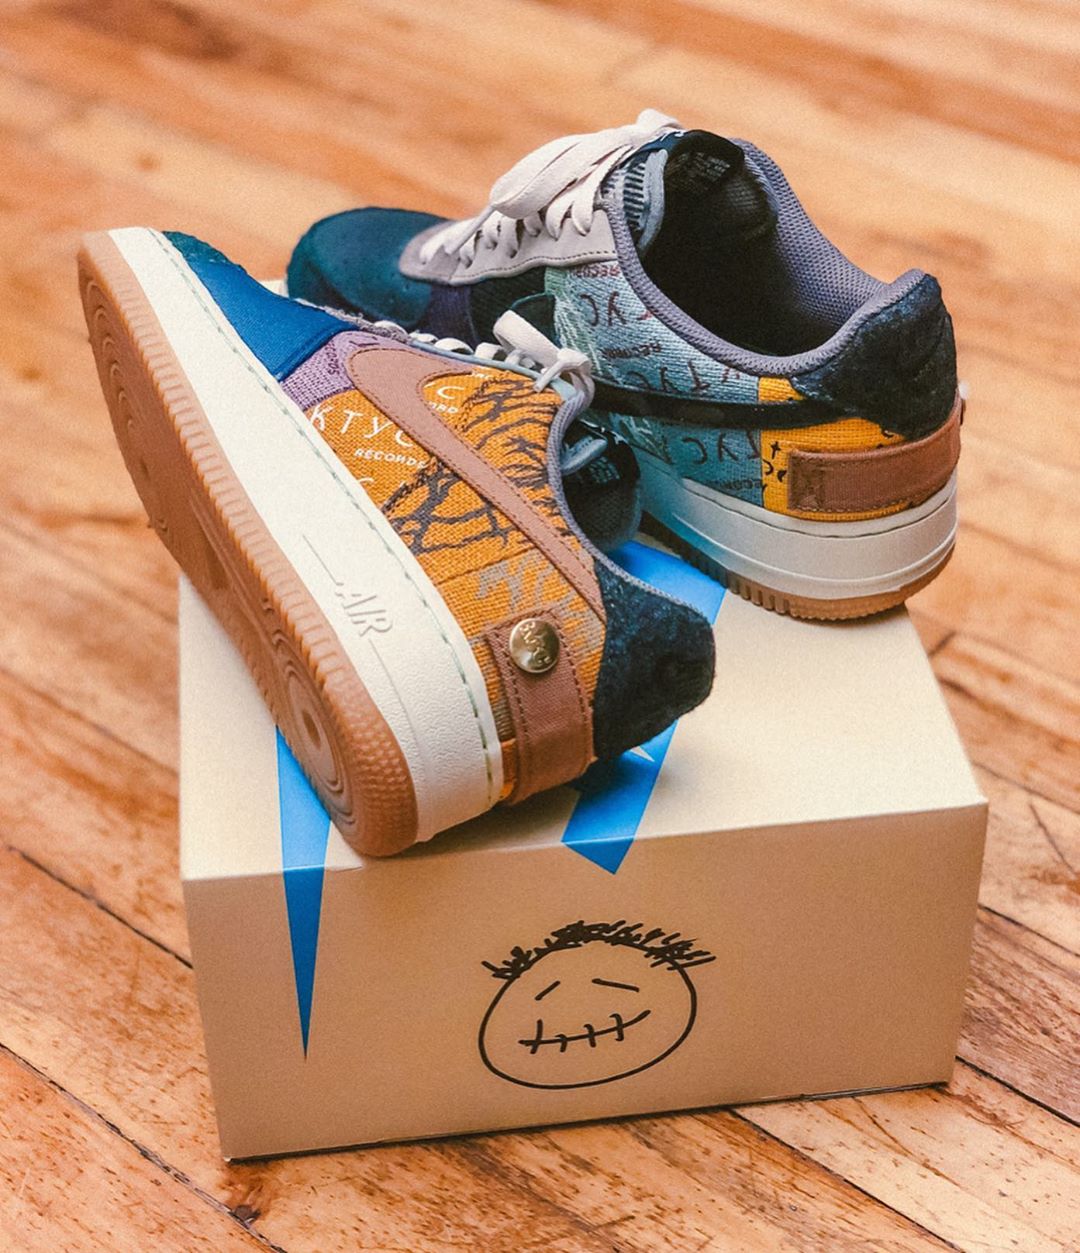 Special Shoe Box for Travis Scott x Nike Air Force 1 Cactus Jack